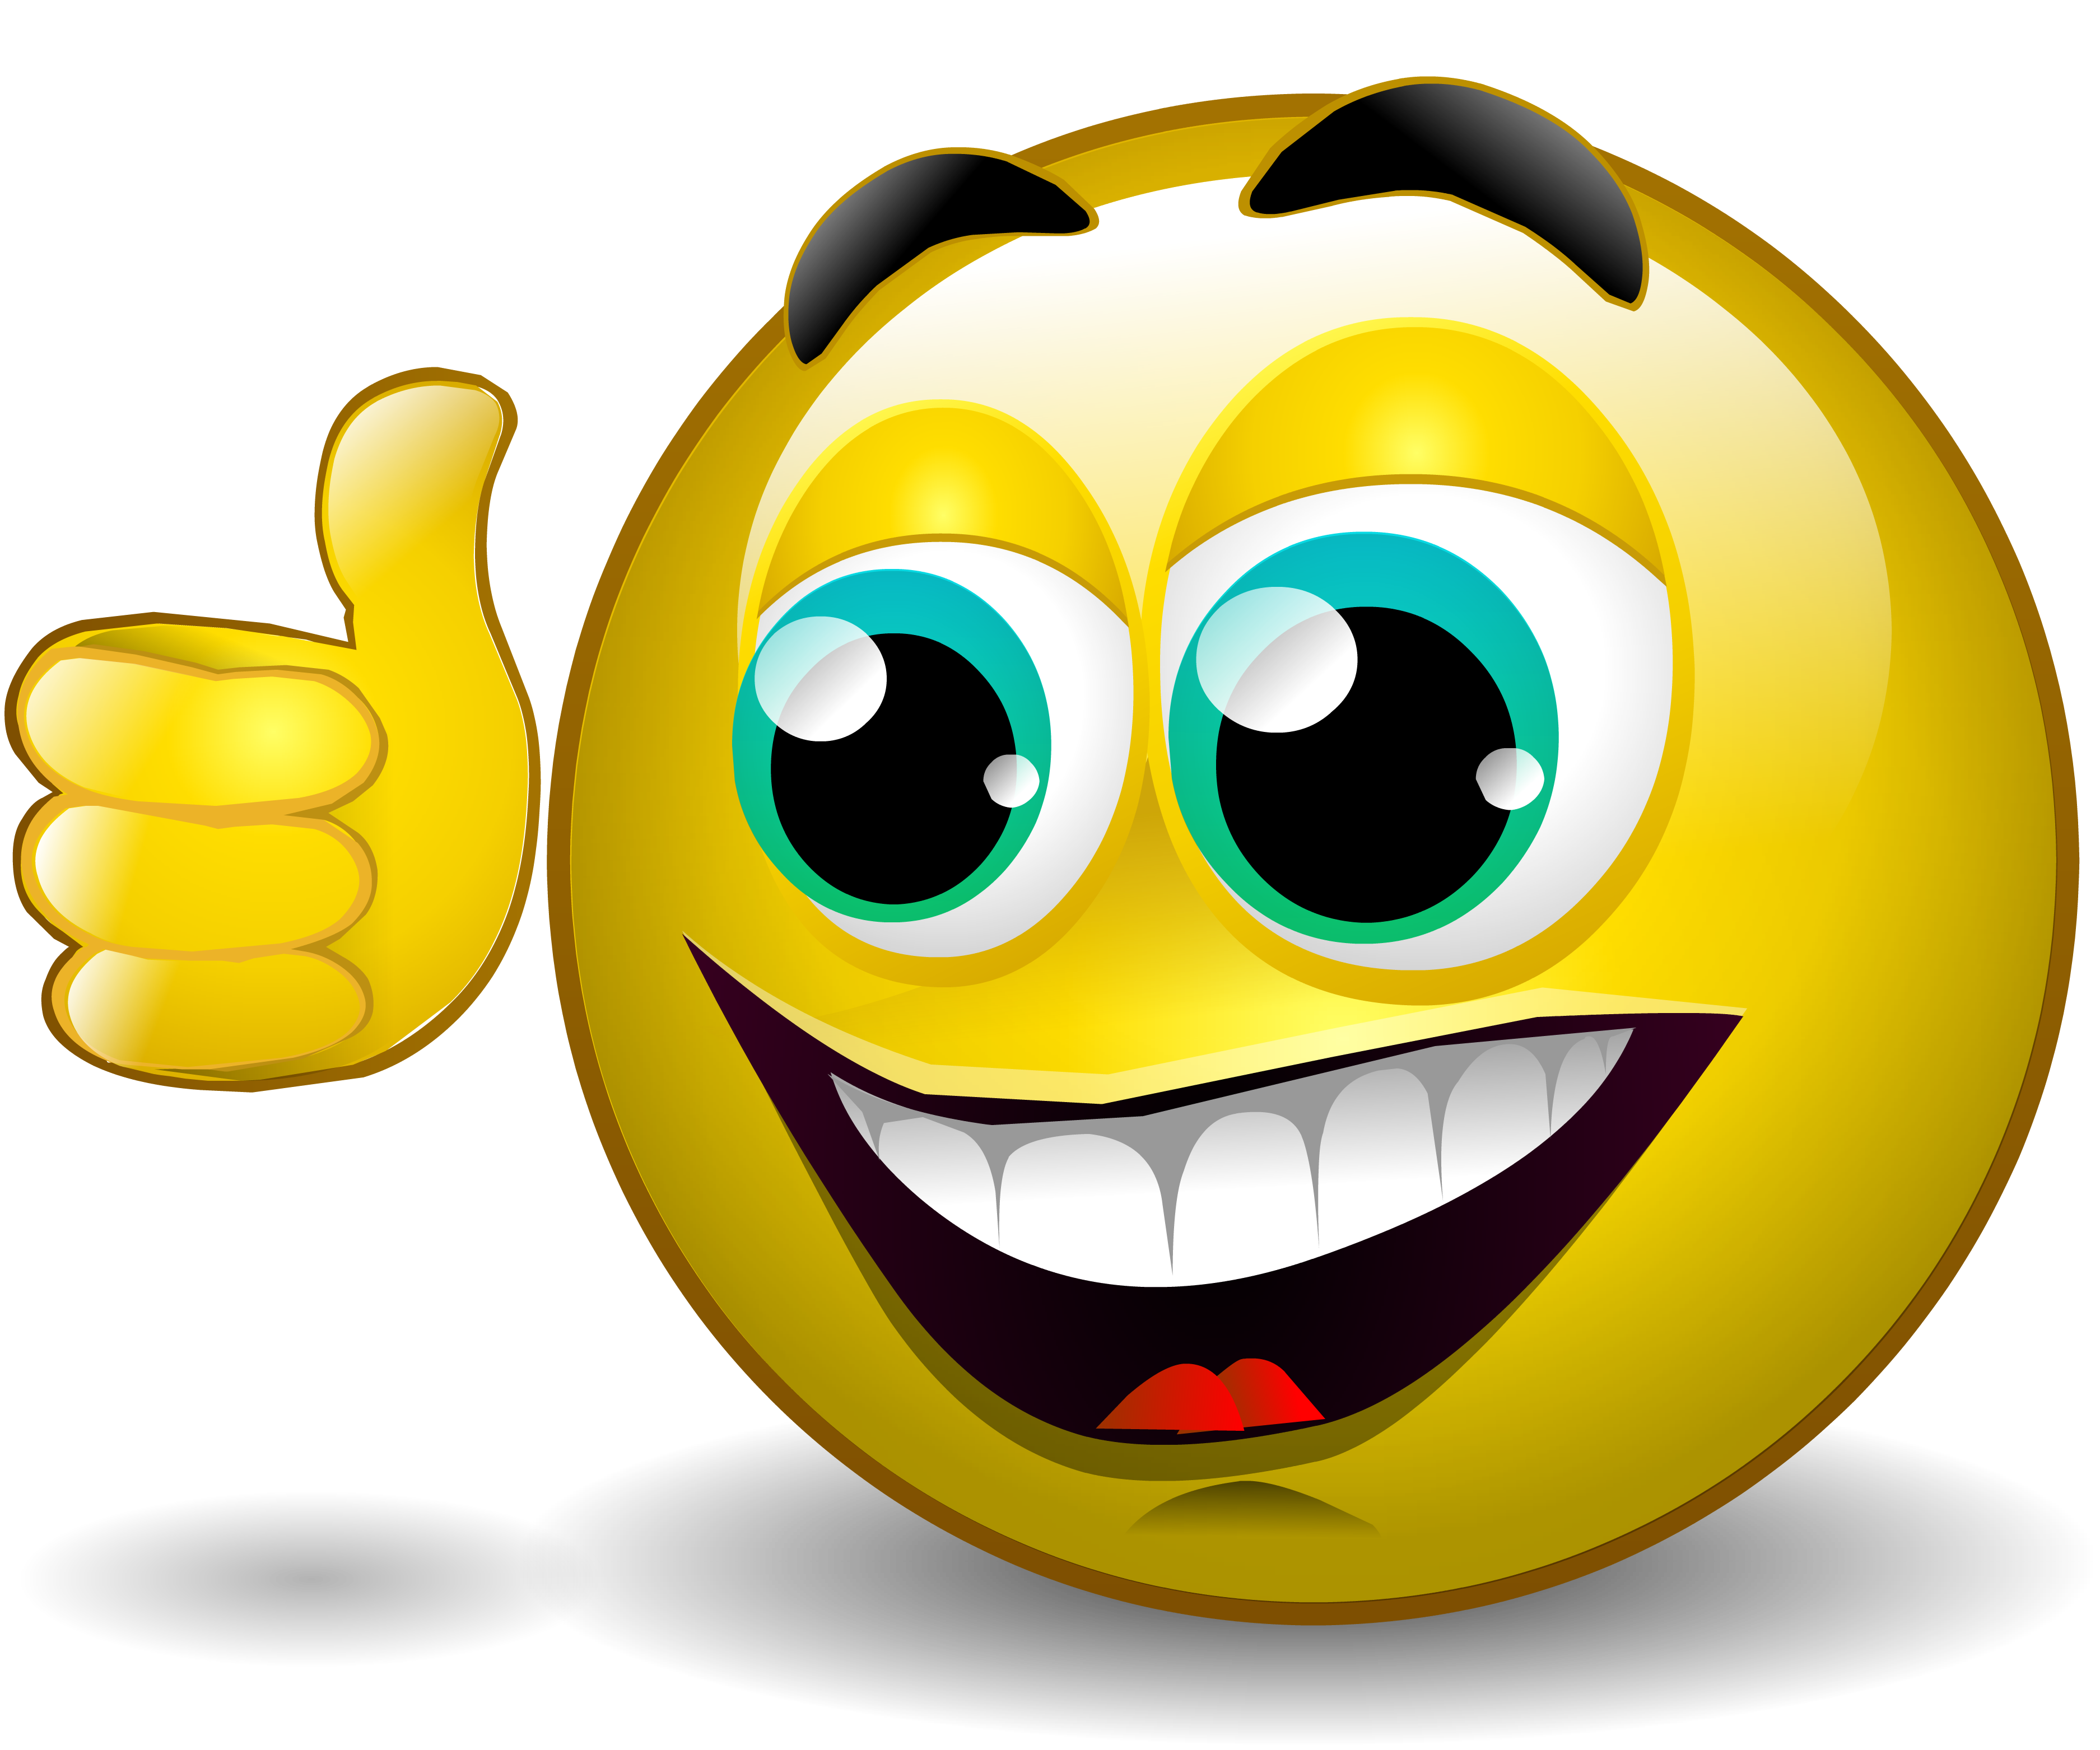 Smiley PNG images Download 